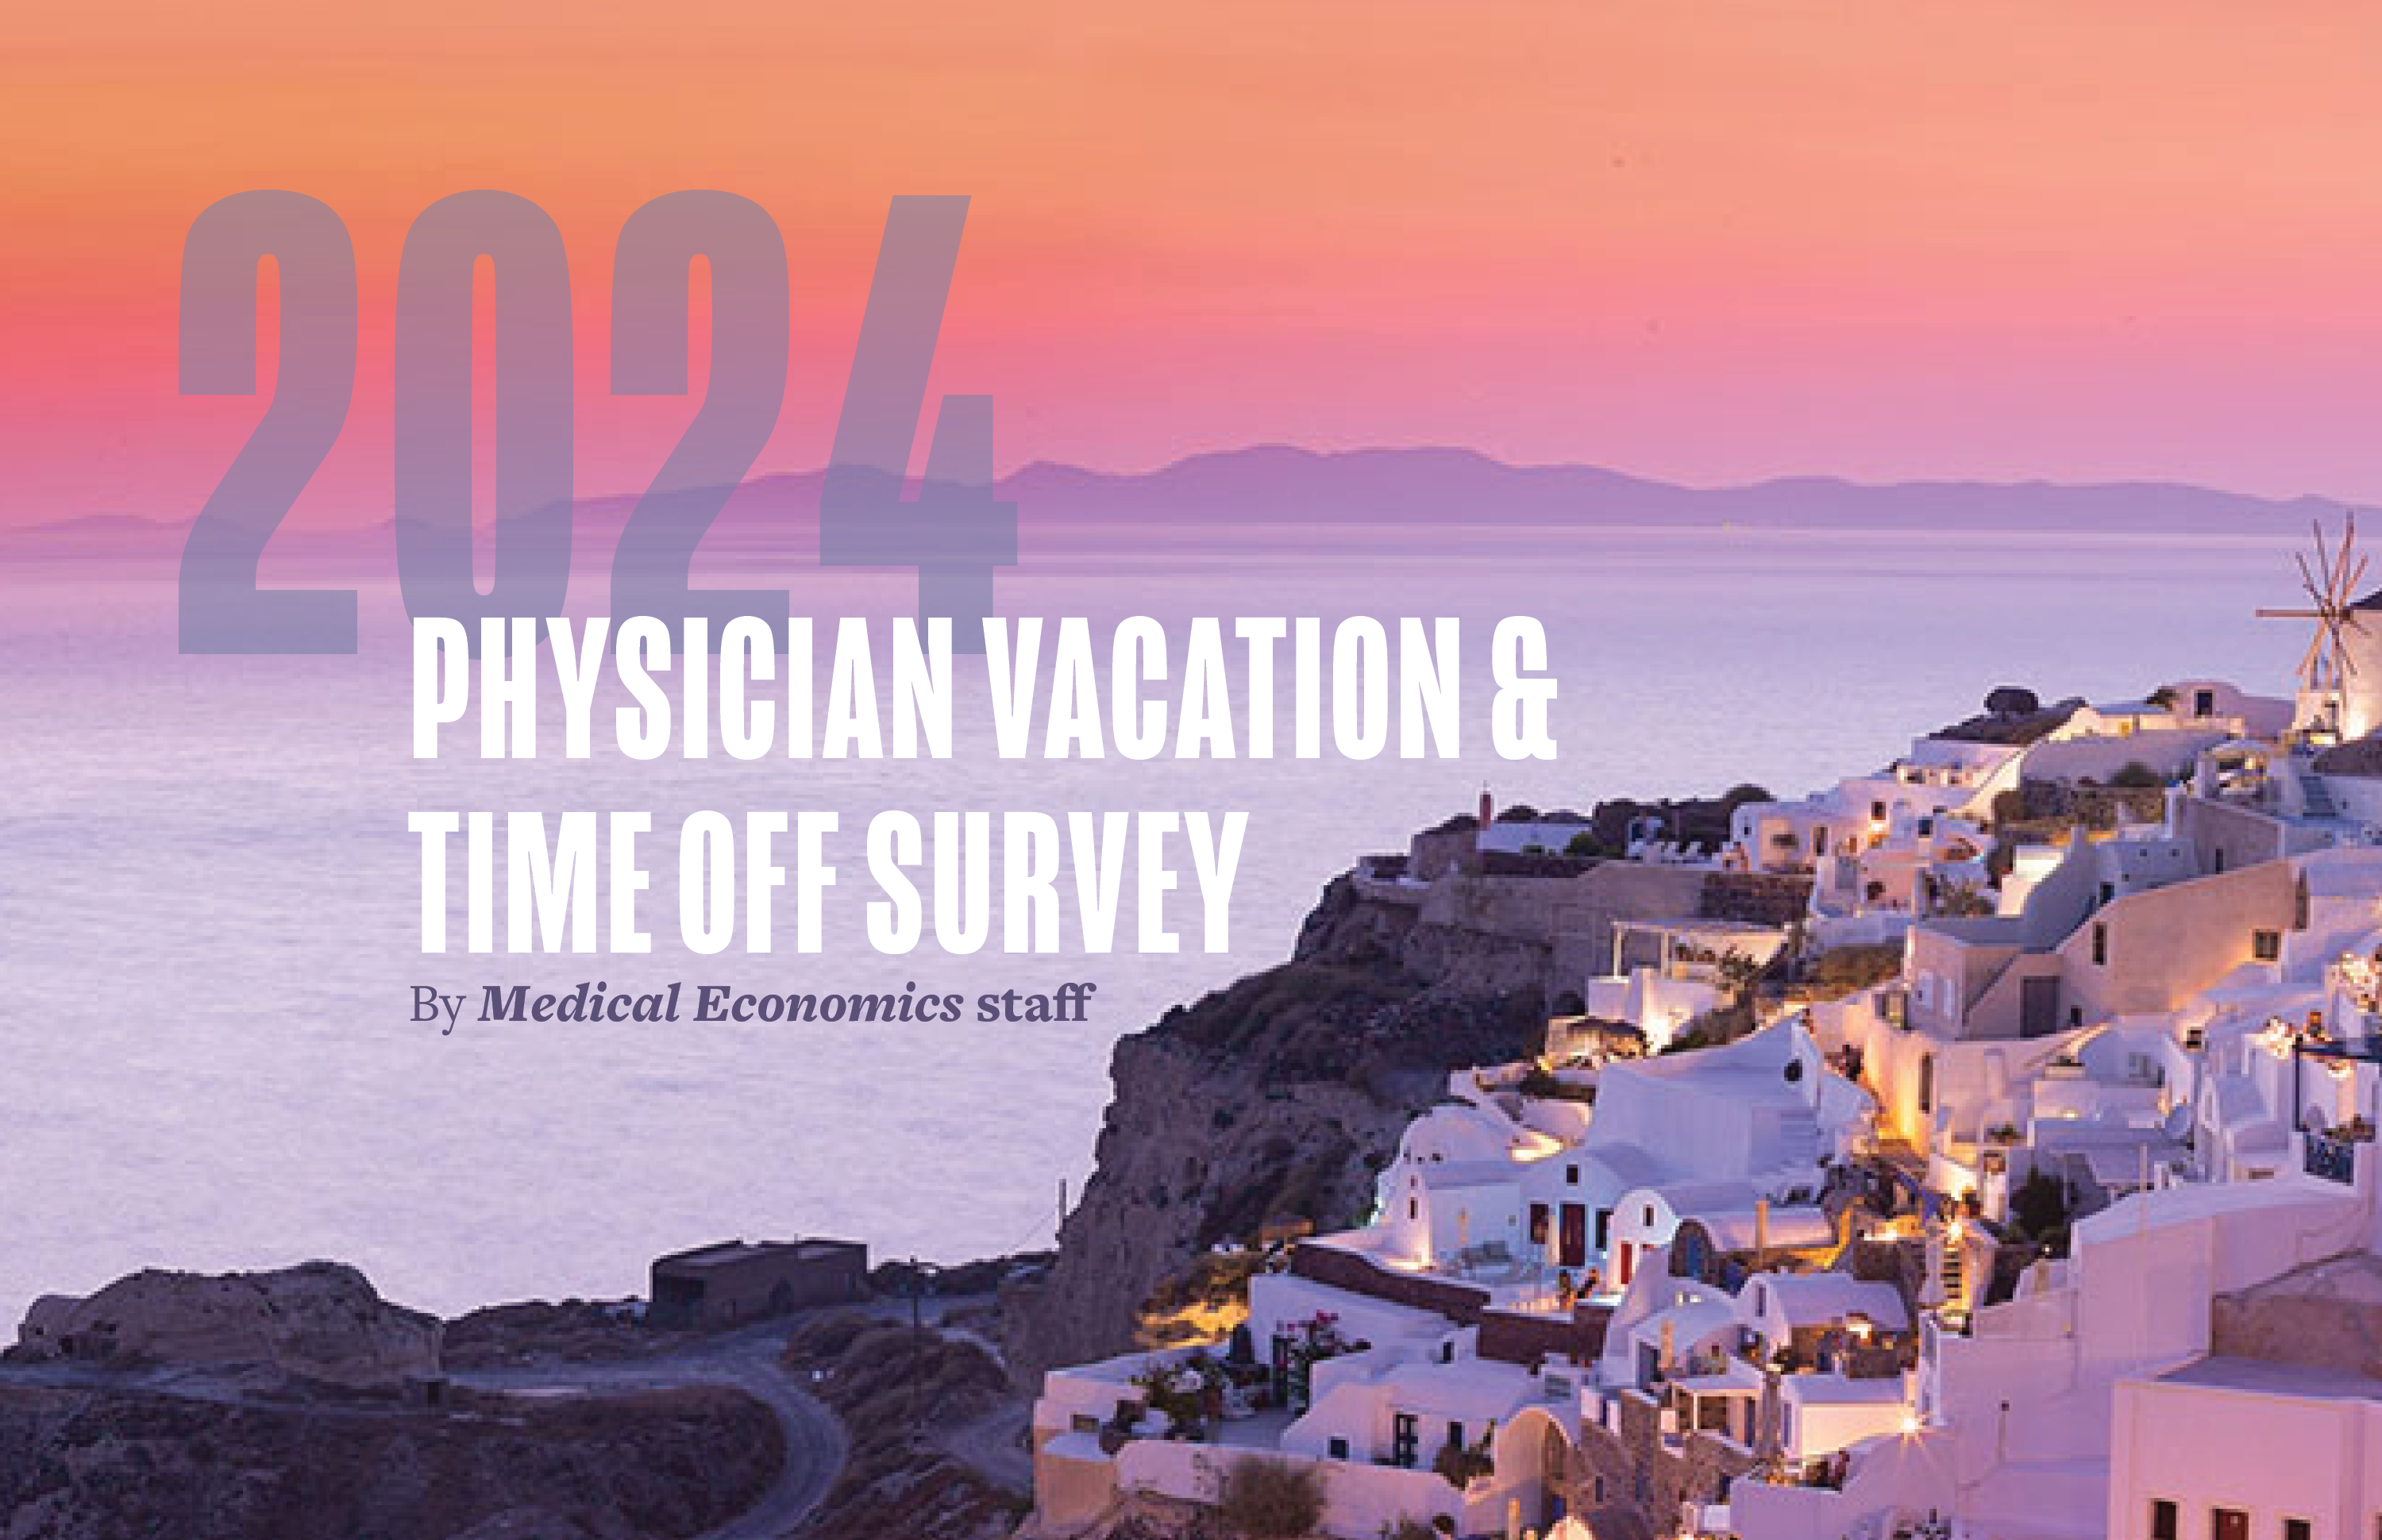 Physician vacation habits and favorite travel spots: Exclusive survey results available